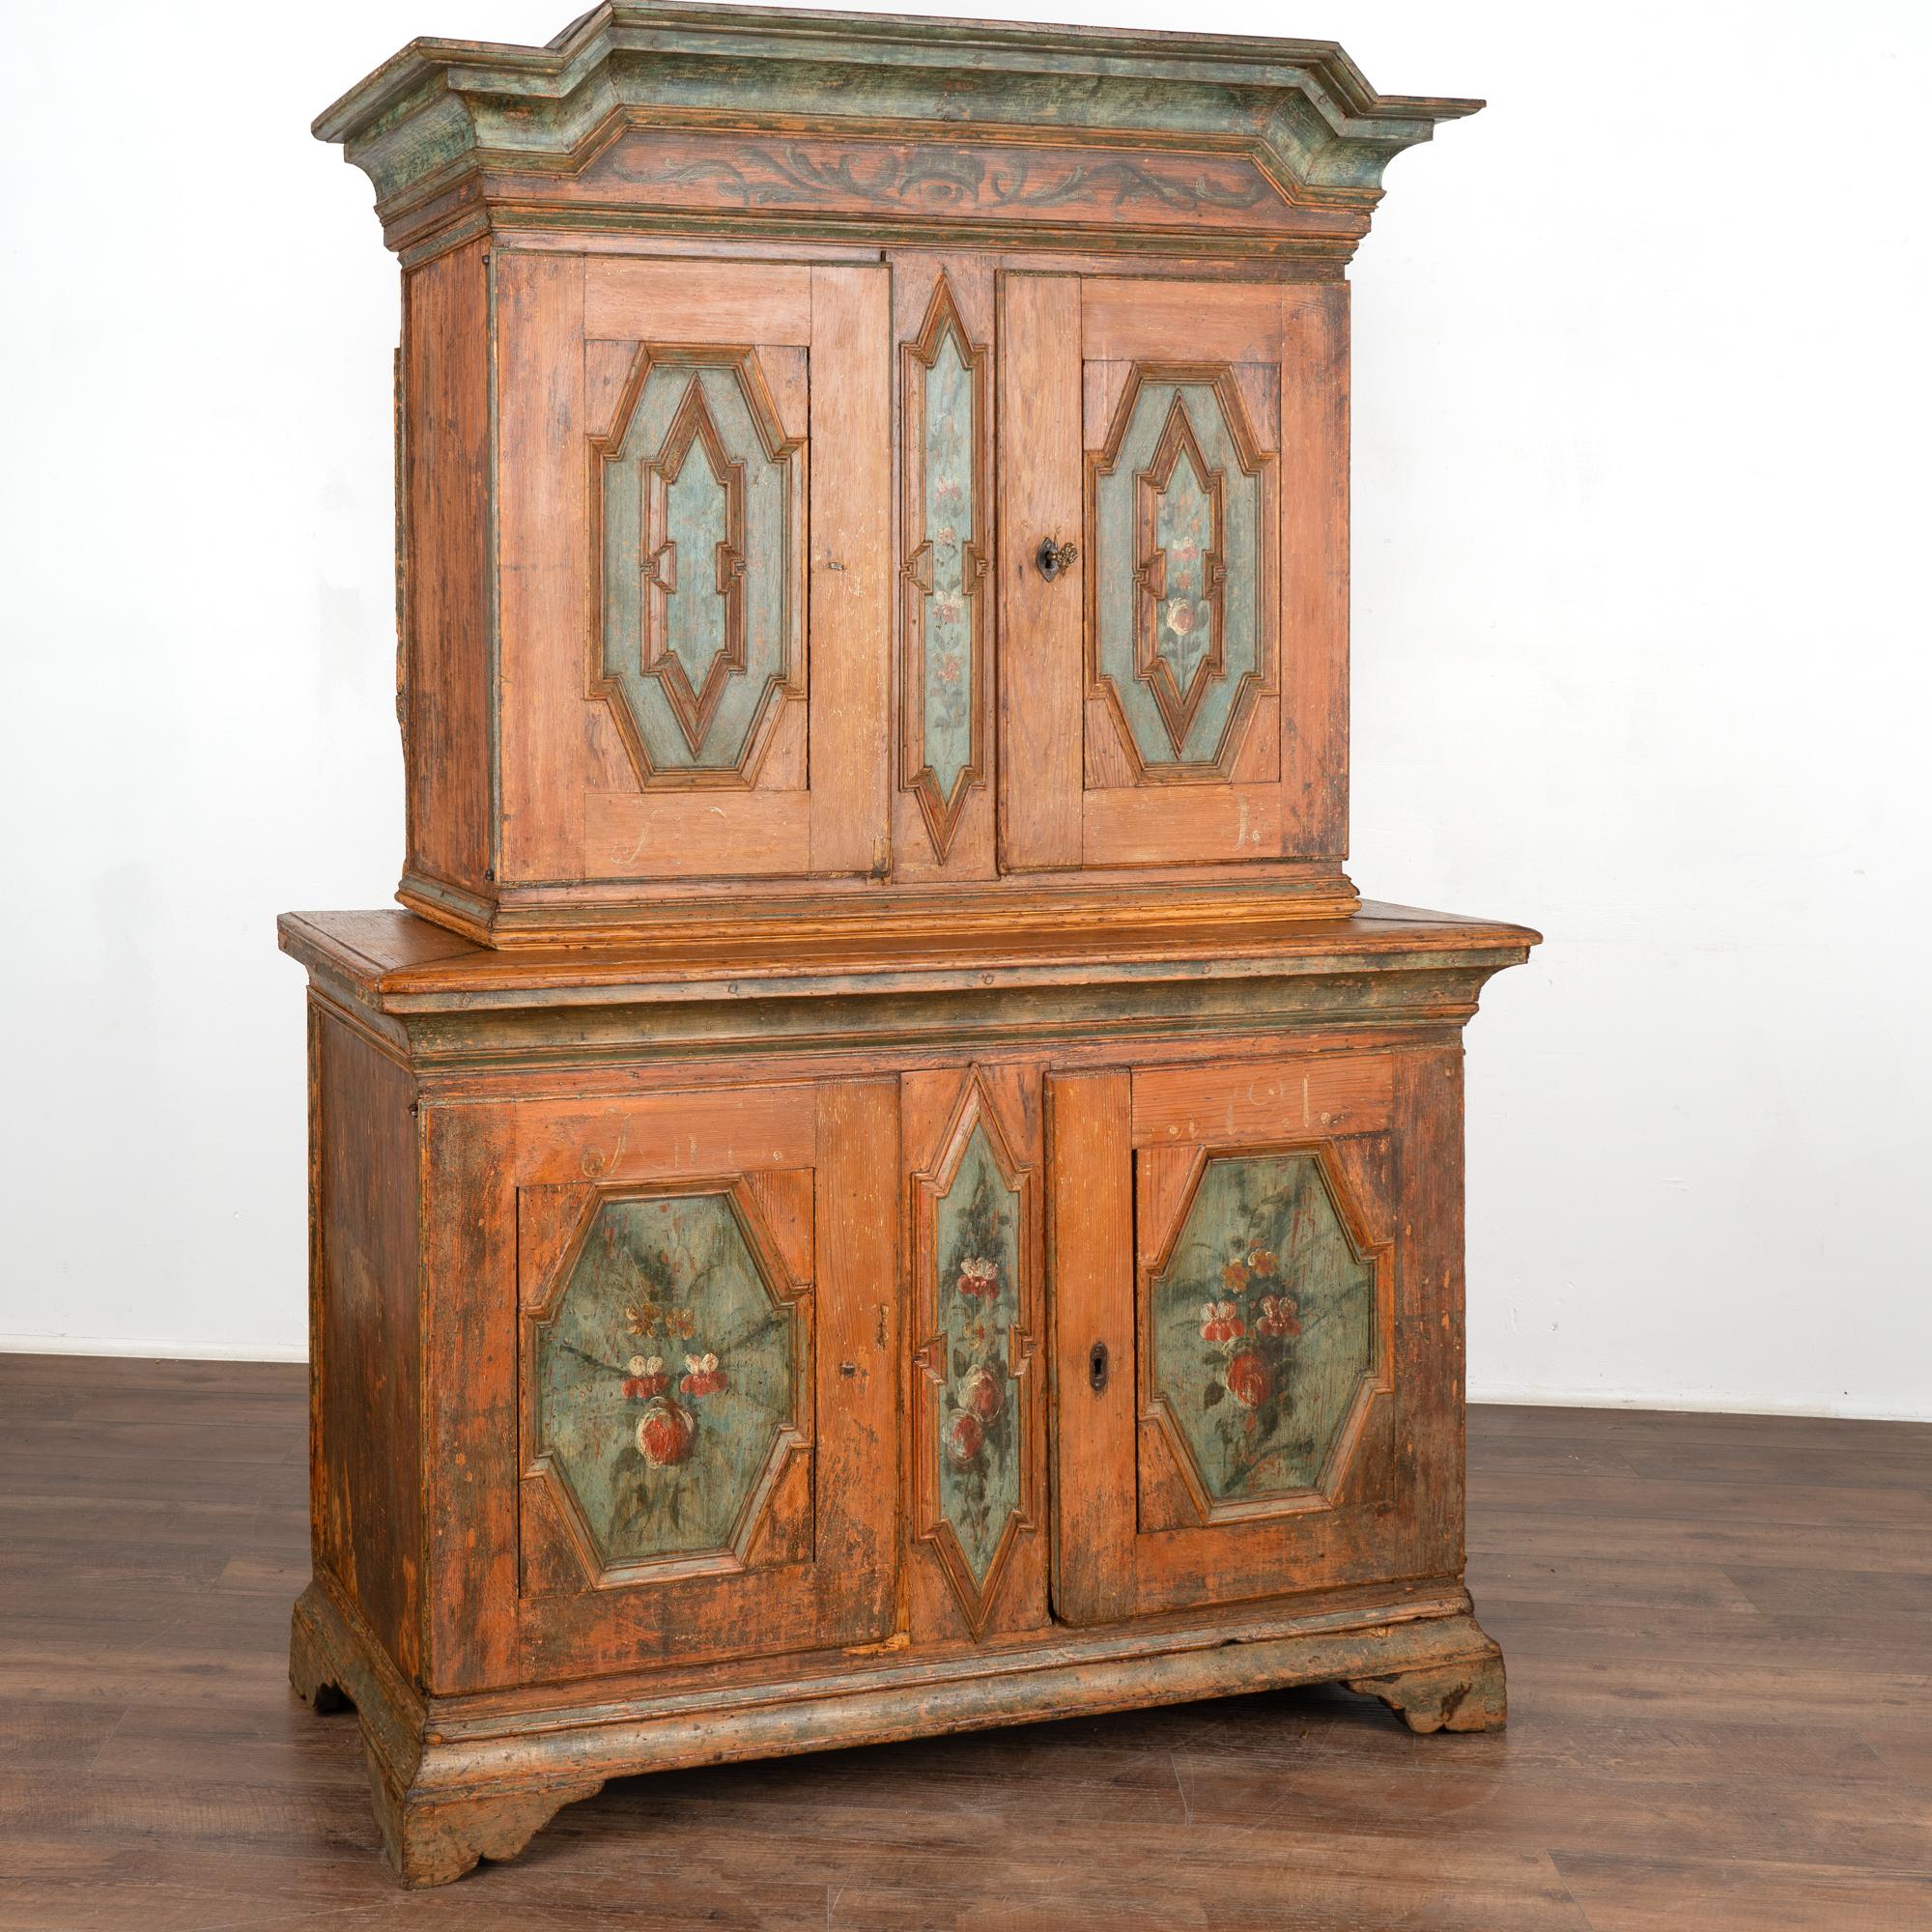 This cabinet is a remarkable example of Swedish country craftsmanship and original folk art painting. The deep patina of the pine is a result of many generations of use and age.
The exquisite hand-painted blue panels are embellished with delicate